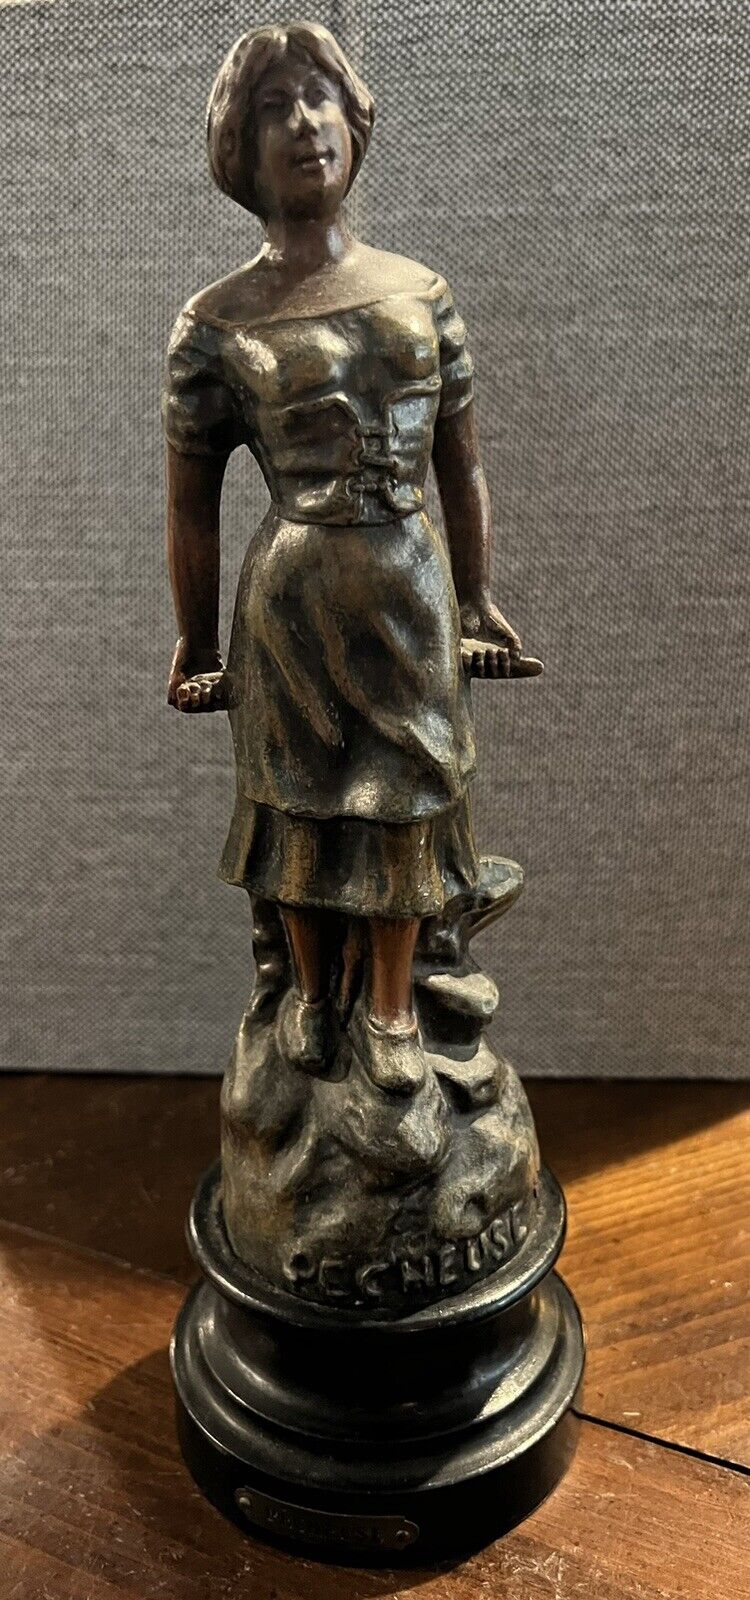 French Spelter PECHEUR et PECHEUSE Bronze Type Statue (Young maiden)